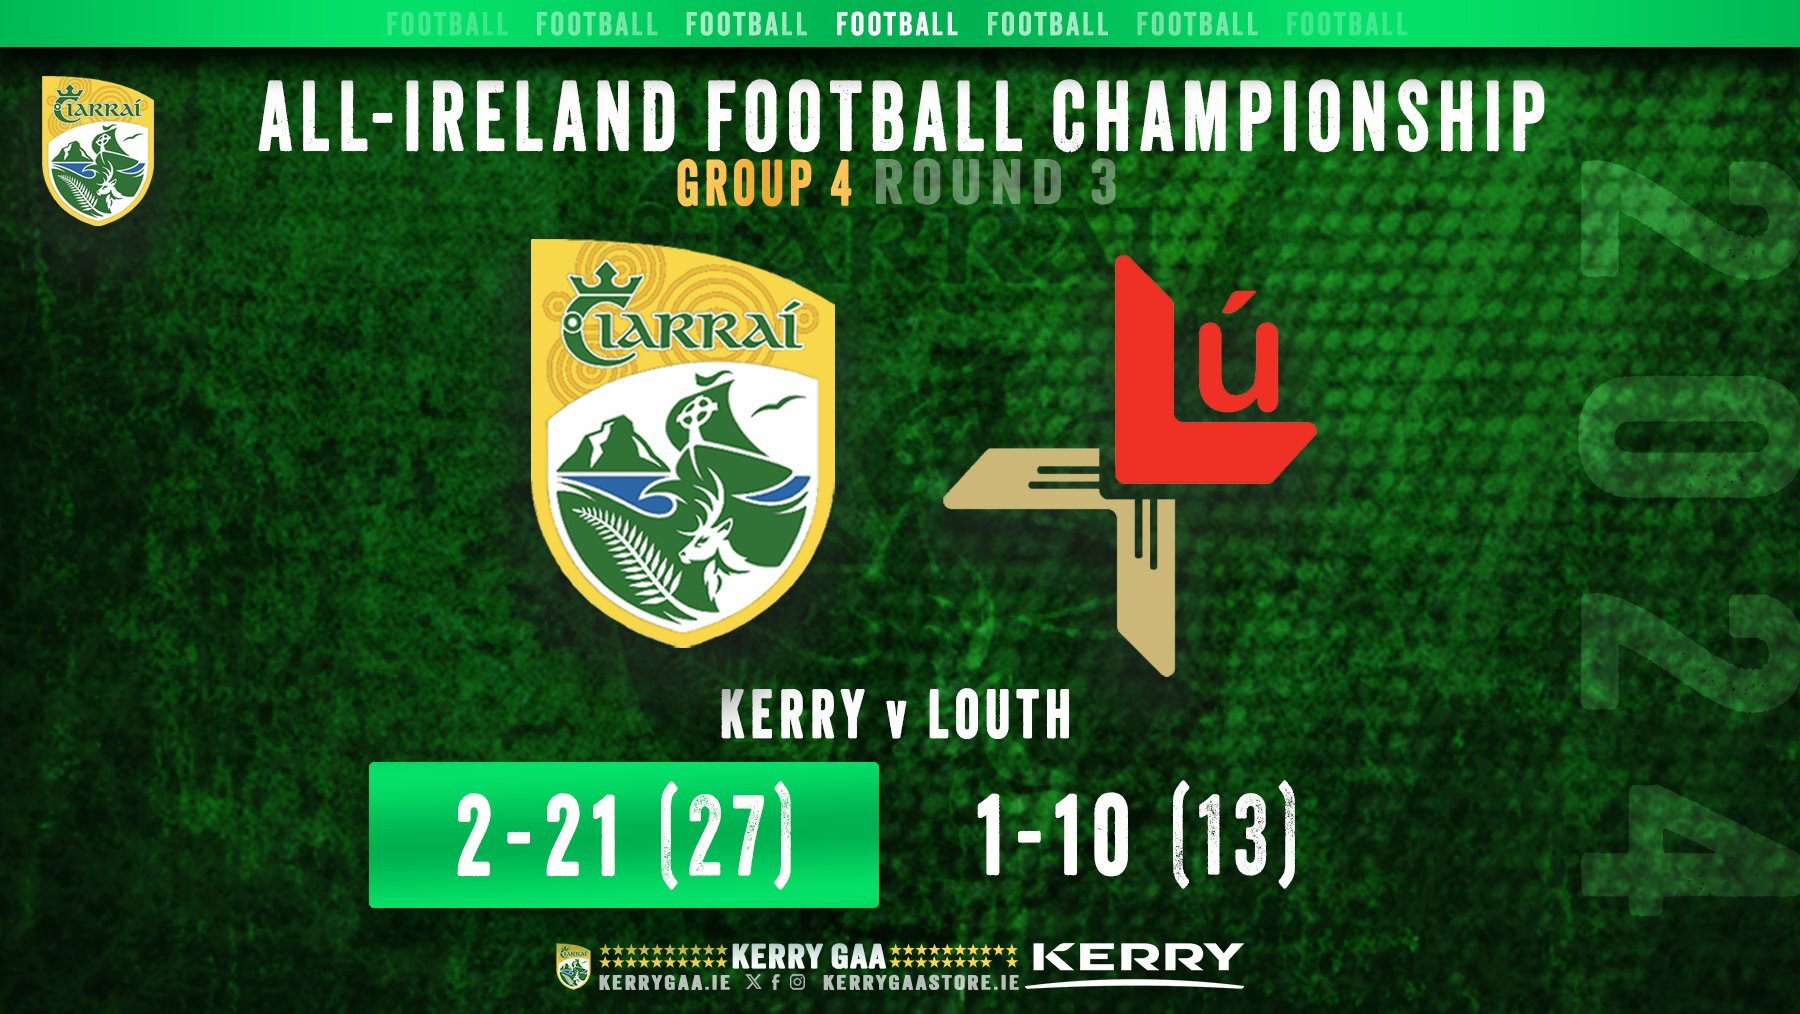 Win for Kerry over Louth in All-Ireland SFC Gp 4, Rd 3